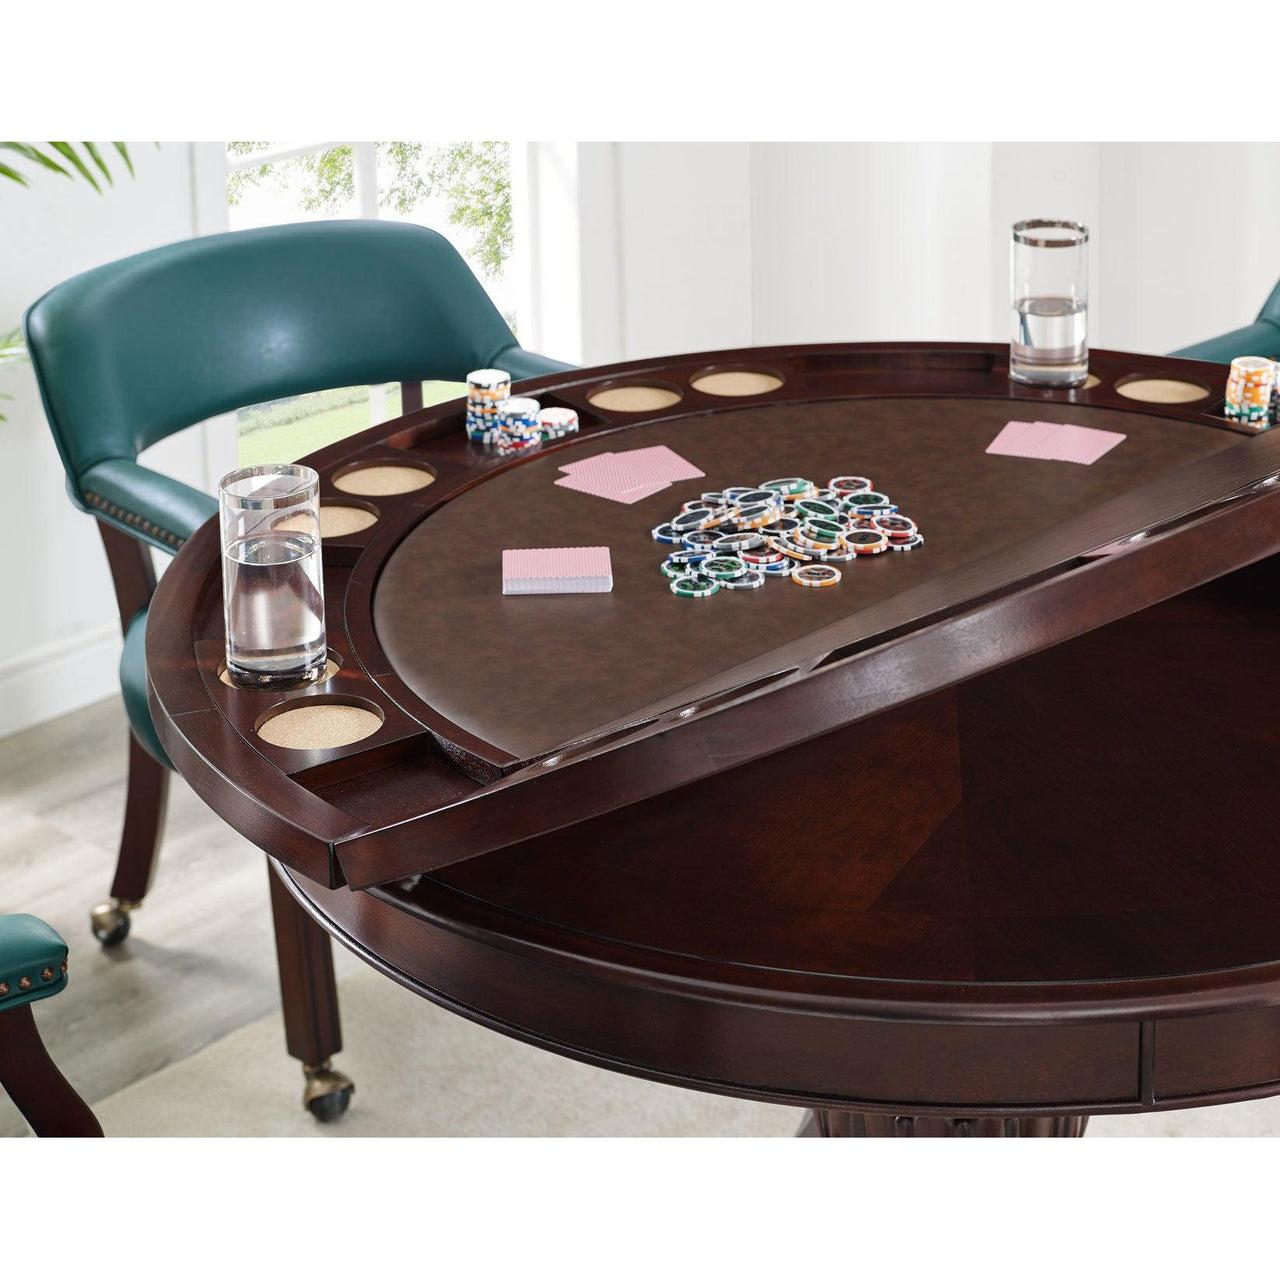 Convertible Poker Table Set Tournament in Teal with matching Chairs-AMERICANA-POKER-TABLES